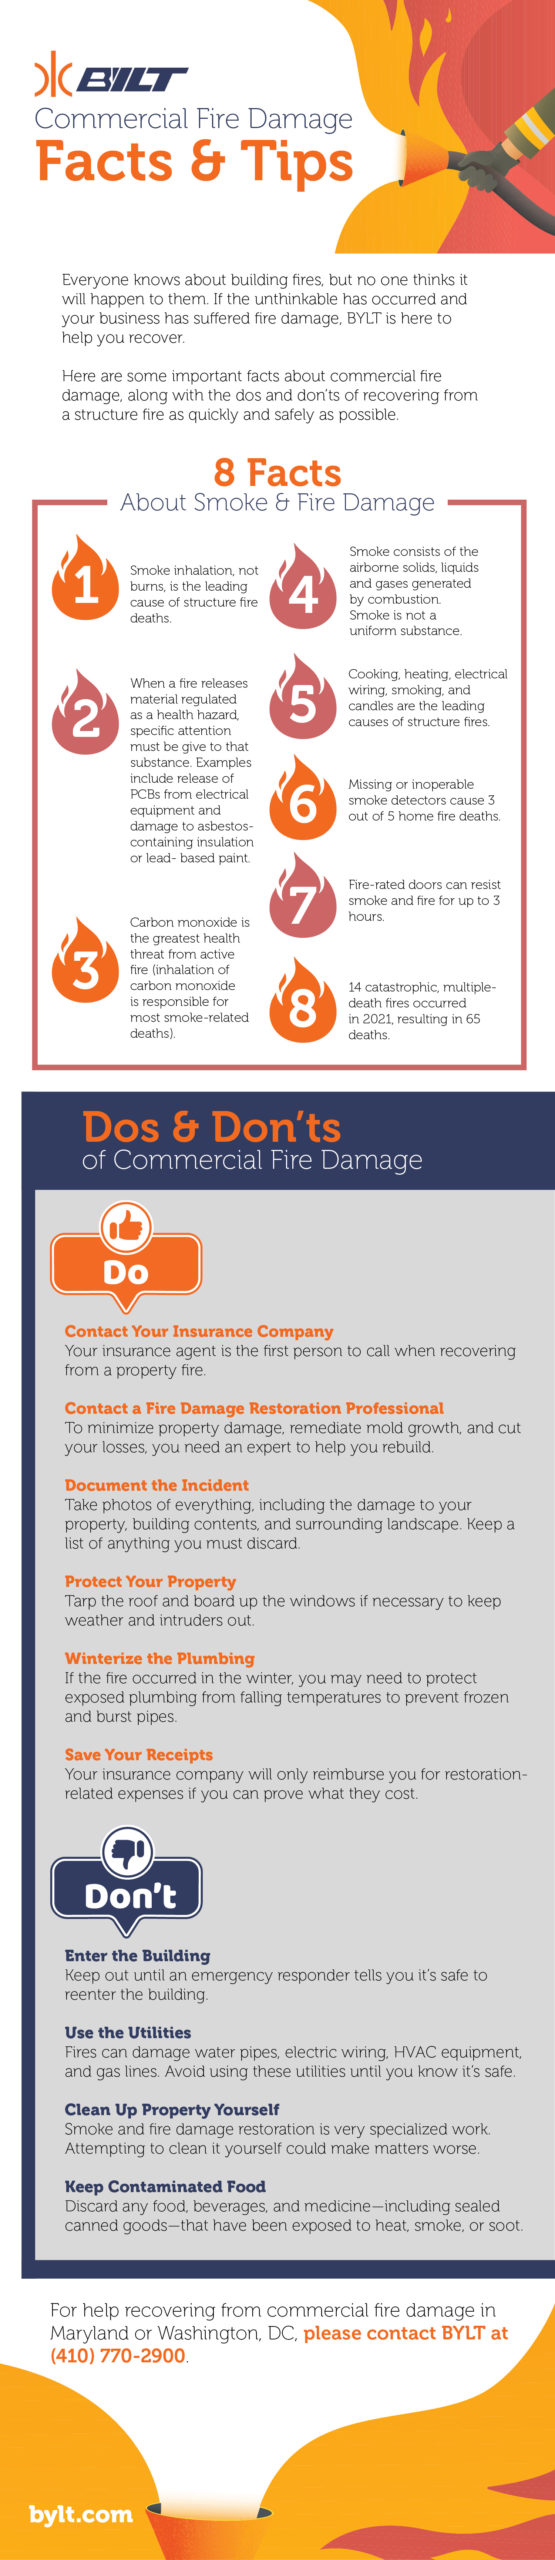 commercial fire damage facts and tips infographic